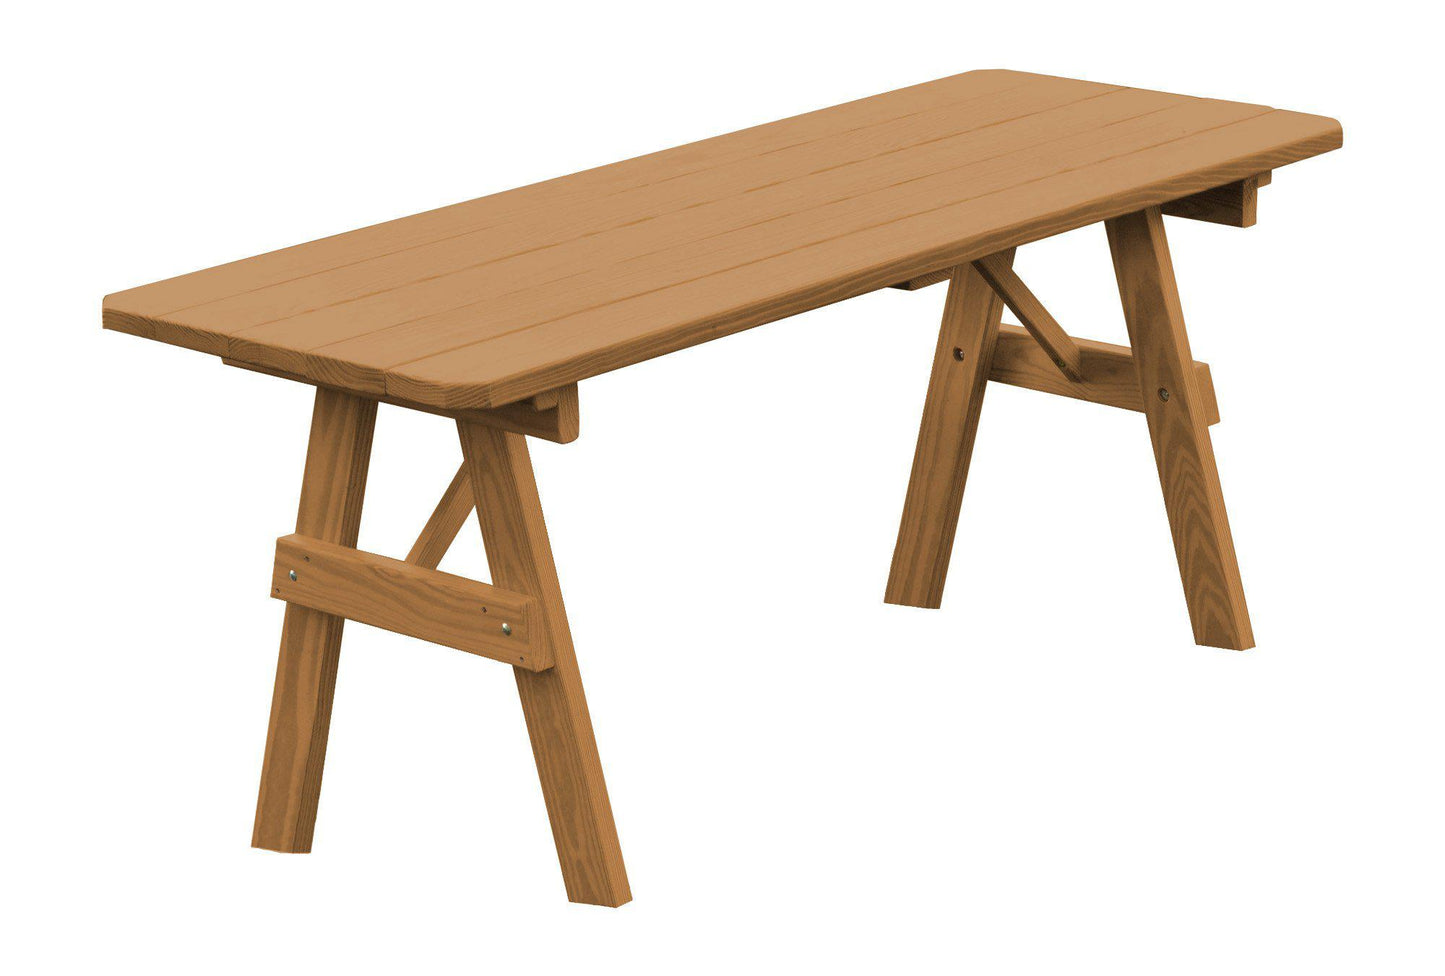 A&L Furniture Co. Pressure Treated Pine 8' Traditional Table Only - LEAD TIME TO SHIP 10 BUSINESS DAYS